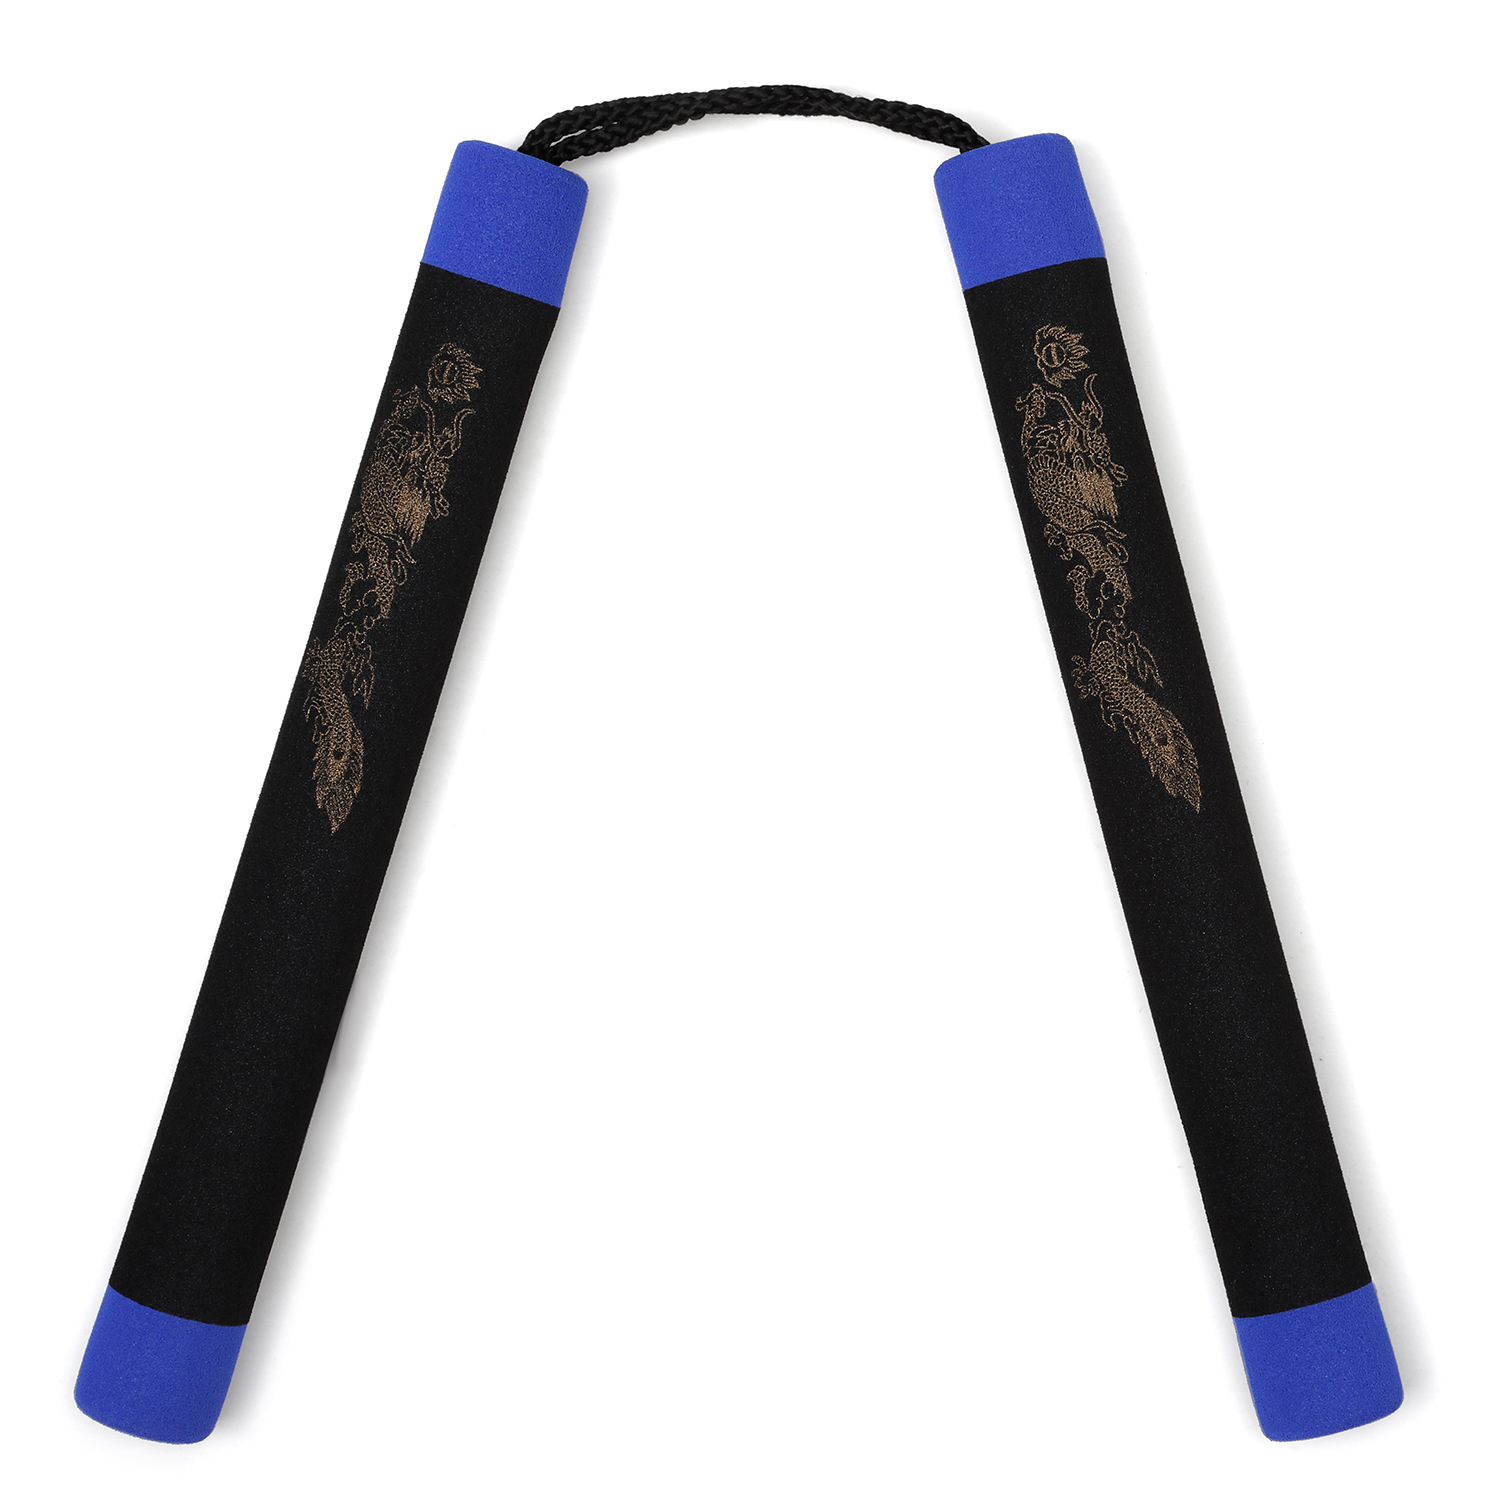 NR-005D: Foam Nunchaku with Cord Black Dragon With Blue Tips - Click Image to Close